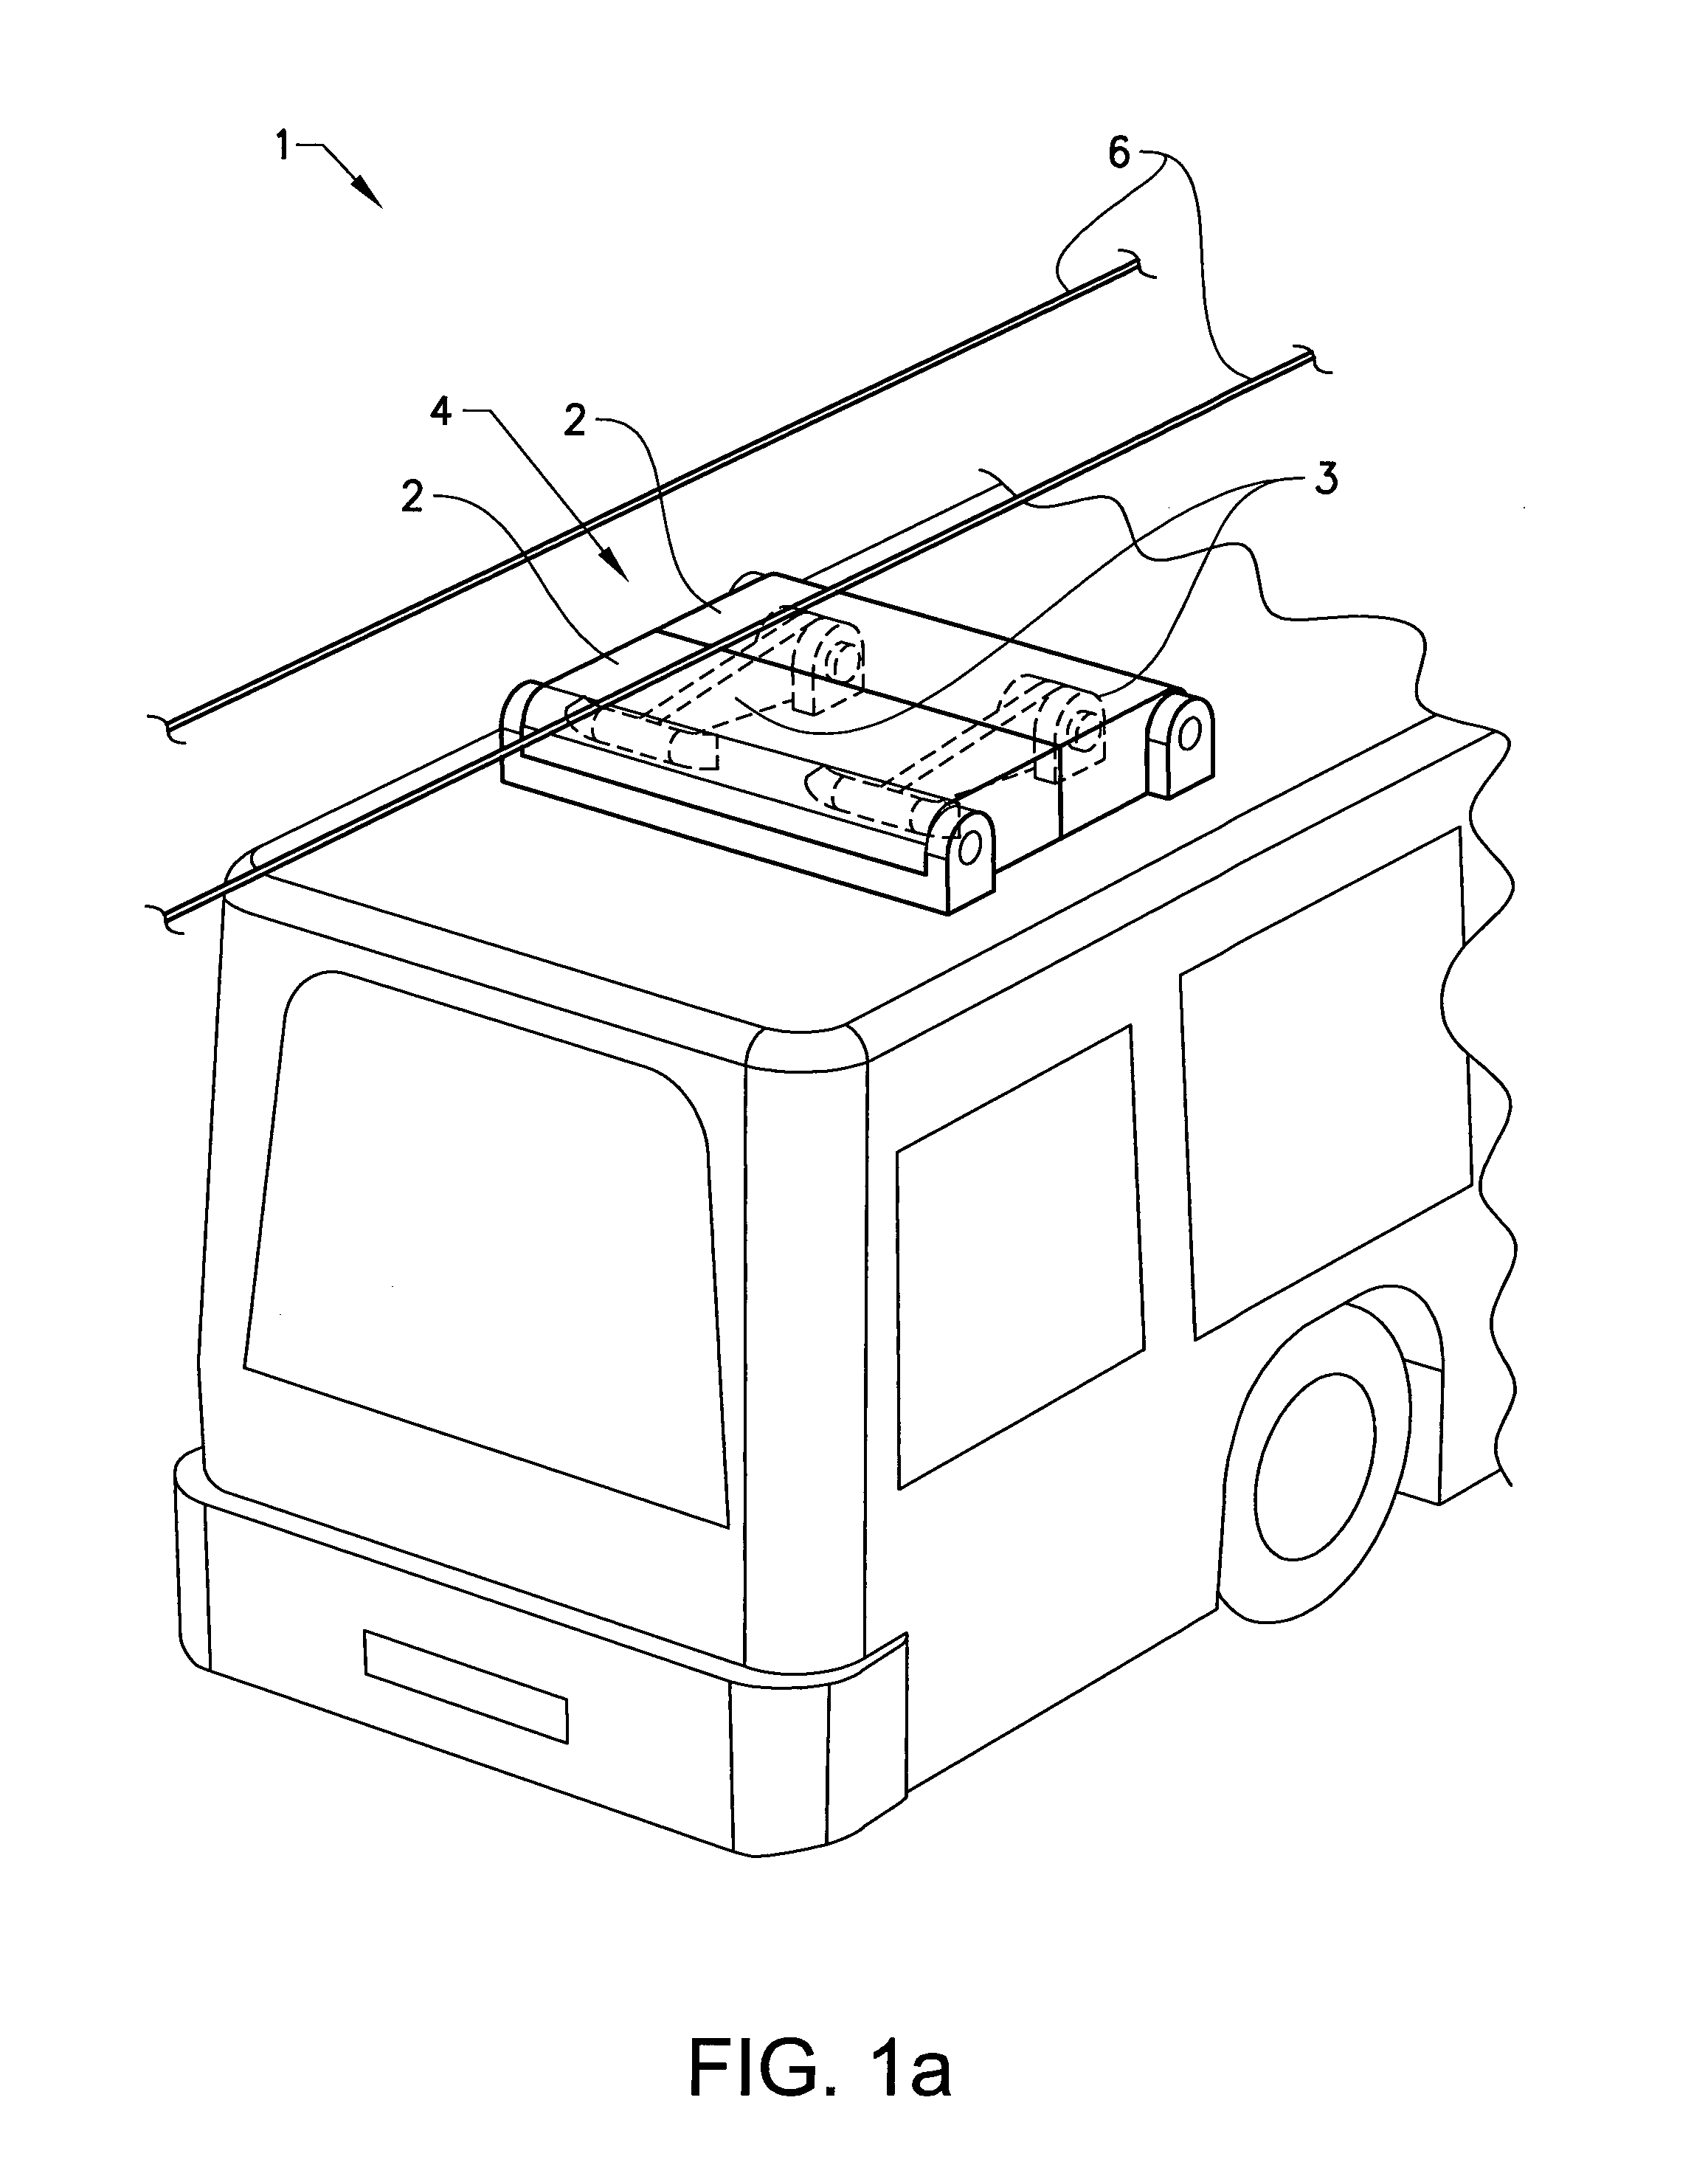 Protection arrangement for an electric vehicle